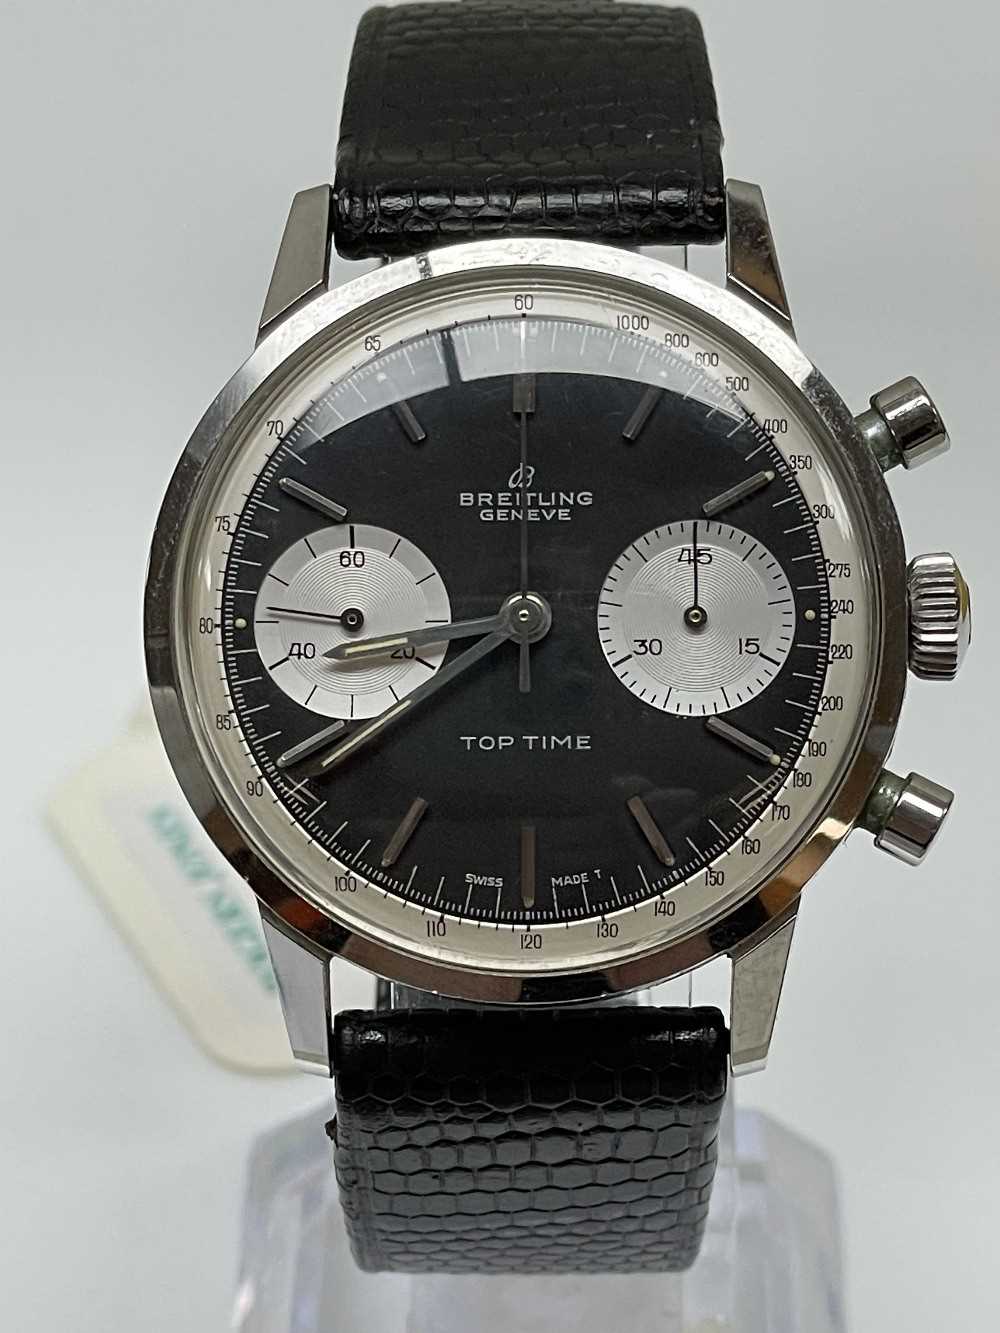 BREITLING TOP TIME 'THUNDERBALL' CHRONOGRAPH WRISTWATCH, ref. 2002, stainless steel, circa 1965, - Image 2 of 11